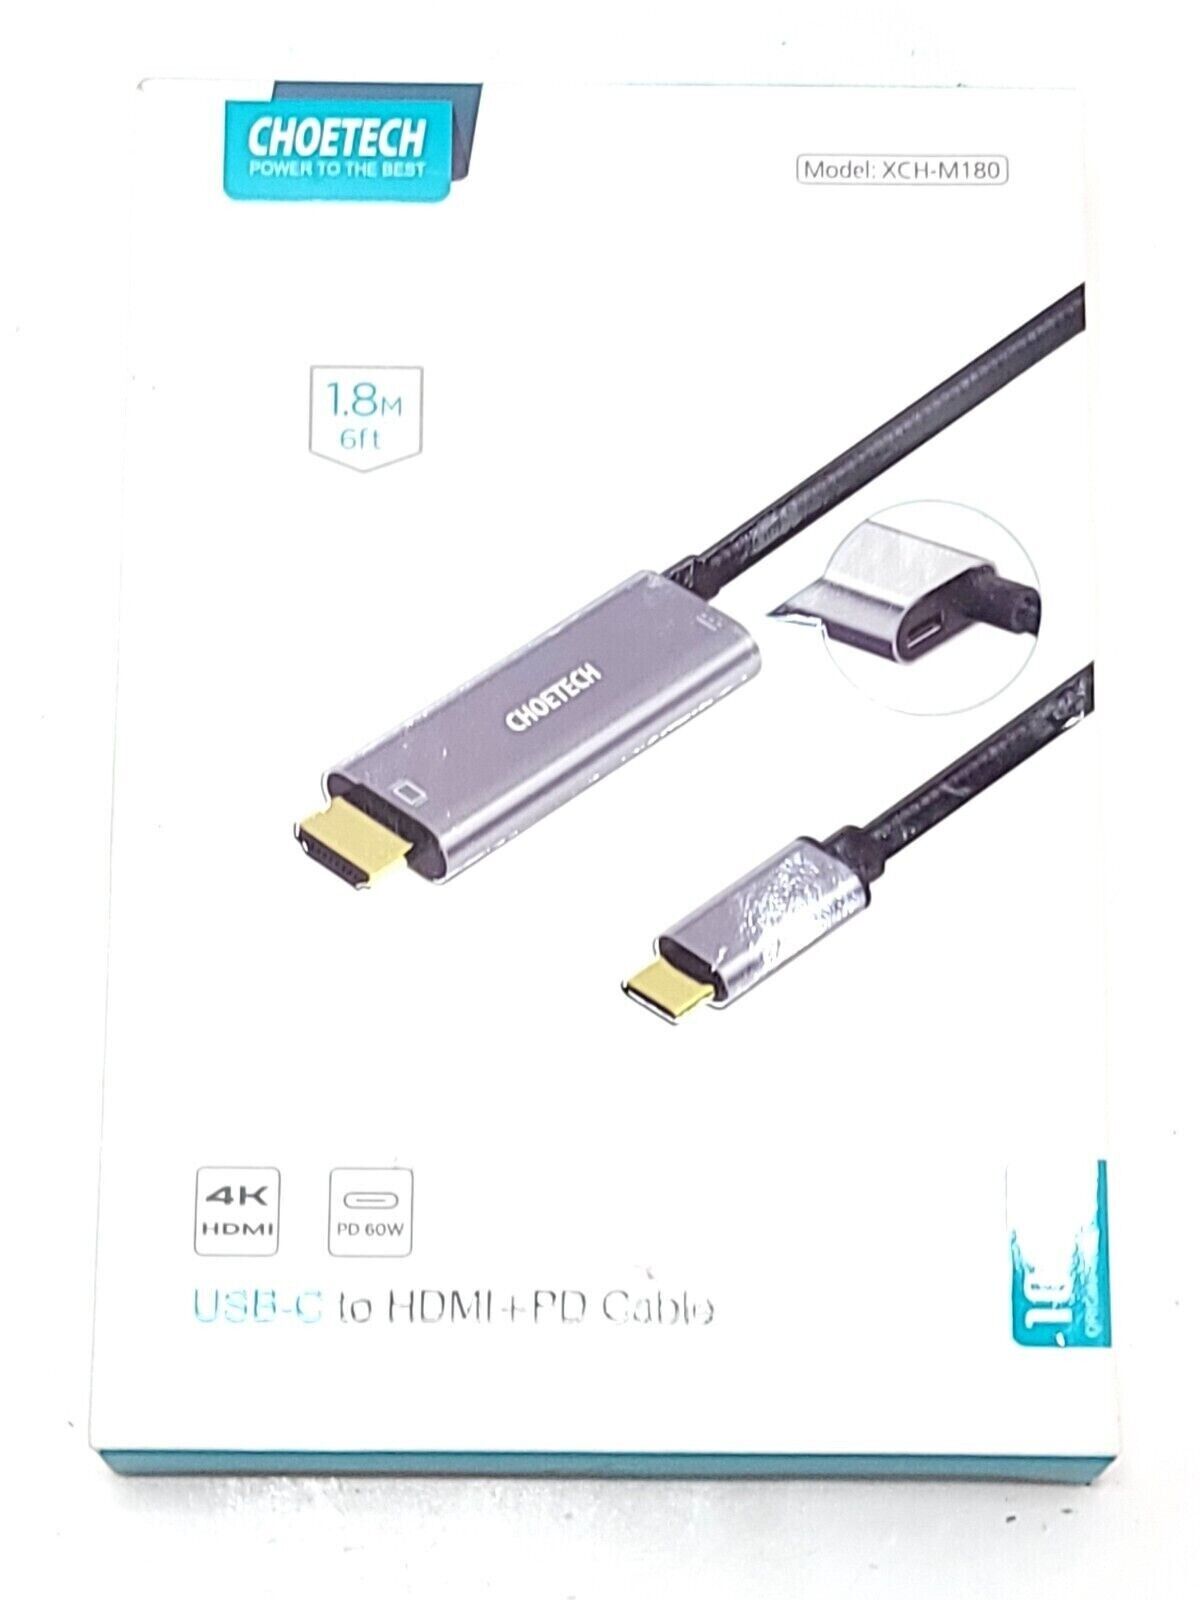 Brand New Choetech XCH-M180 USB-C To HDMI PD Cable 6ft 1.8M Silver 